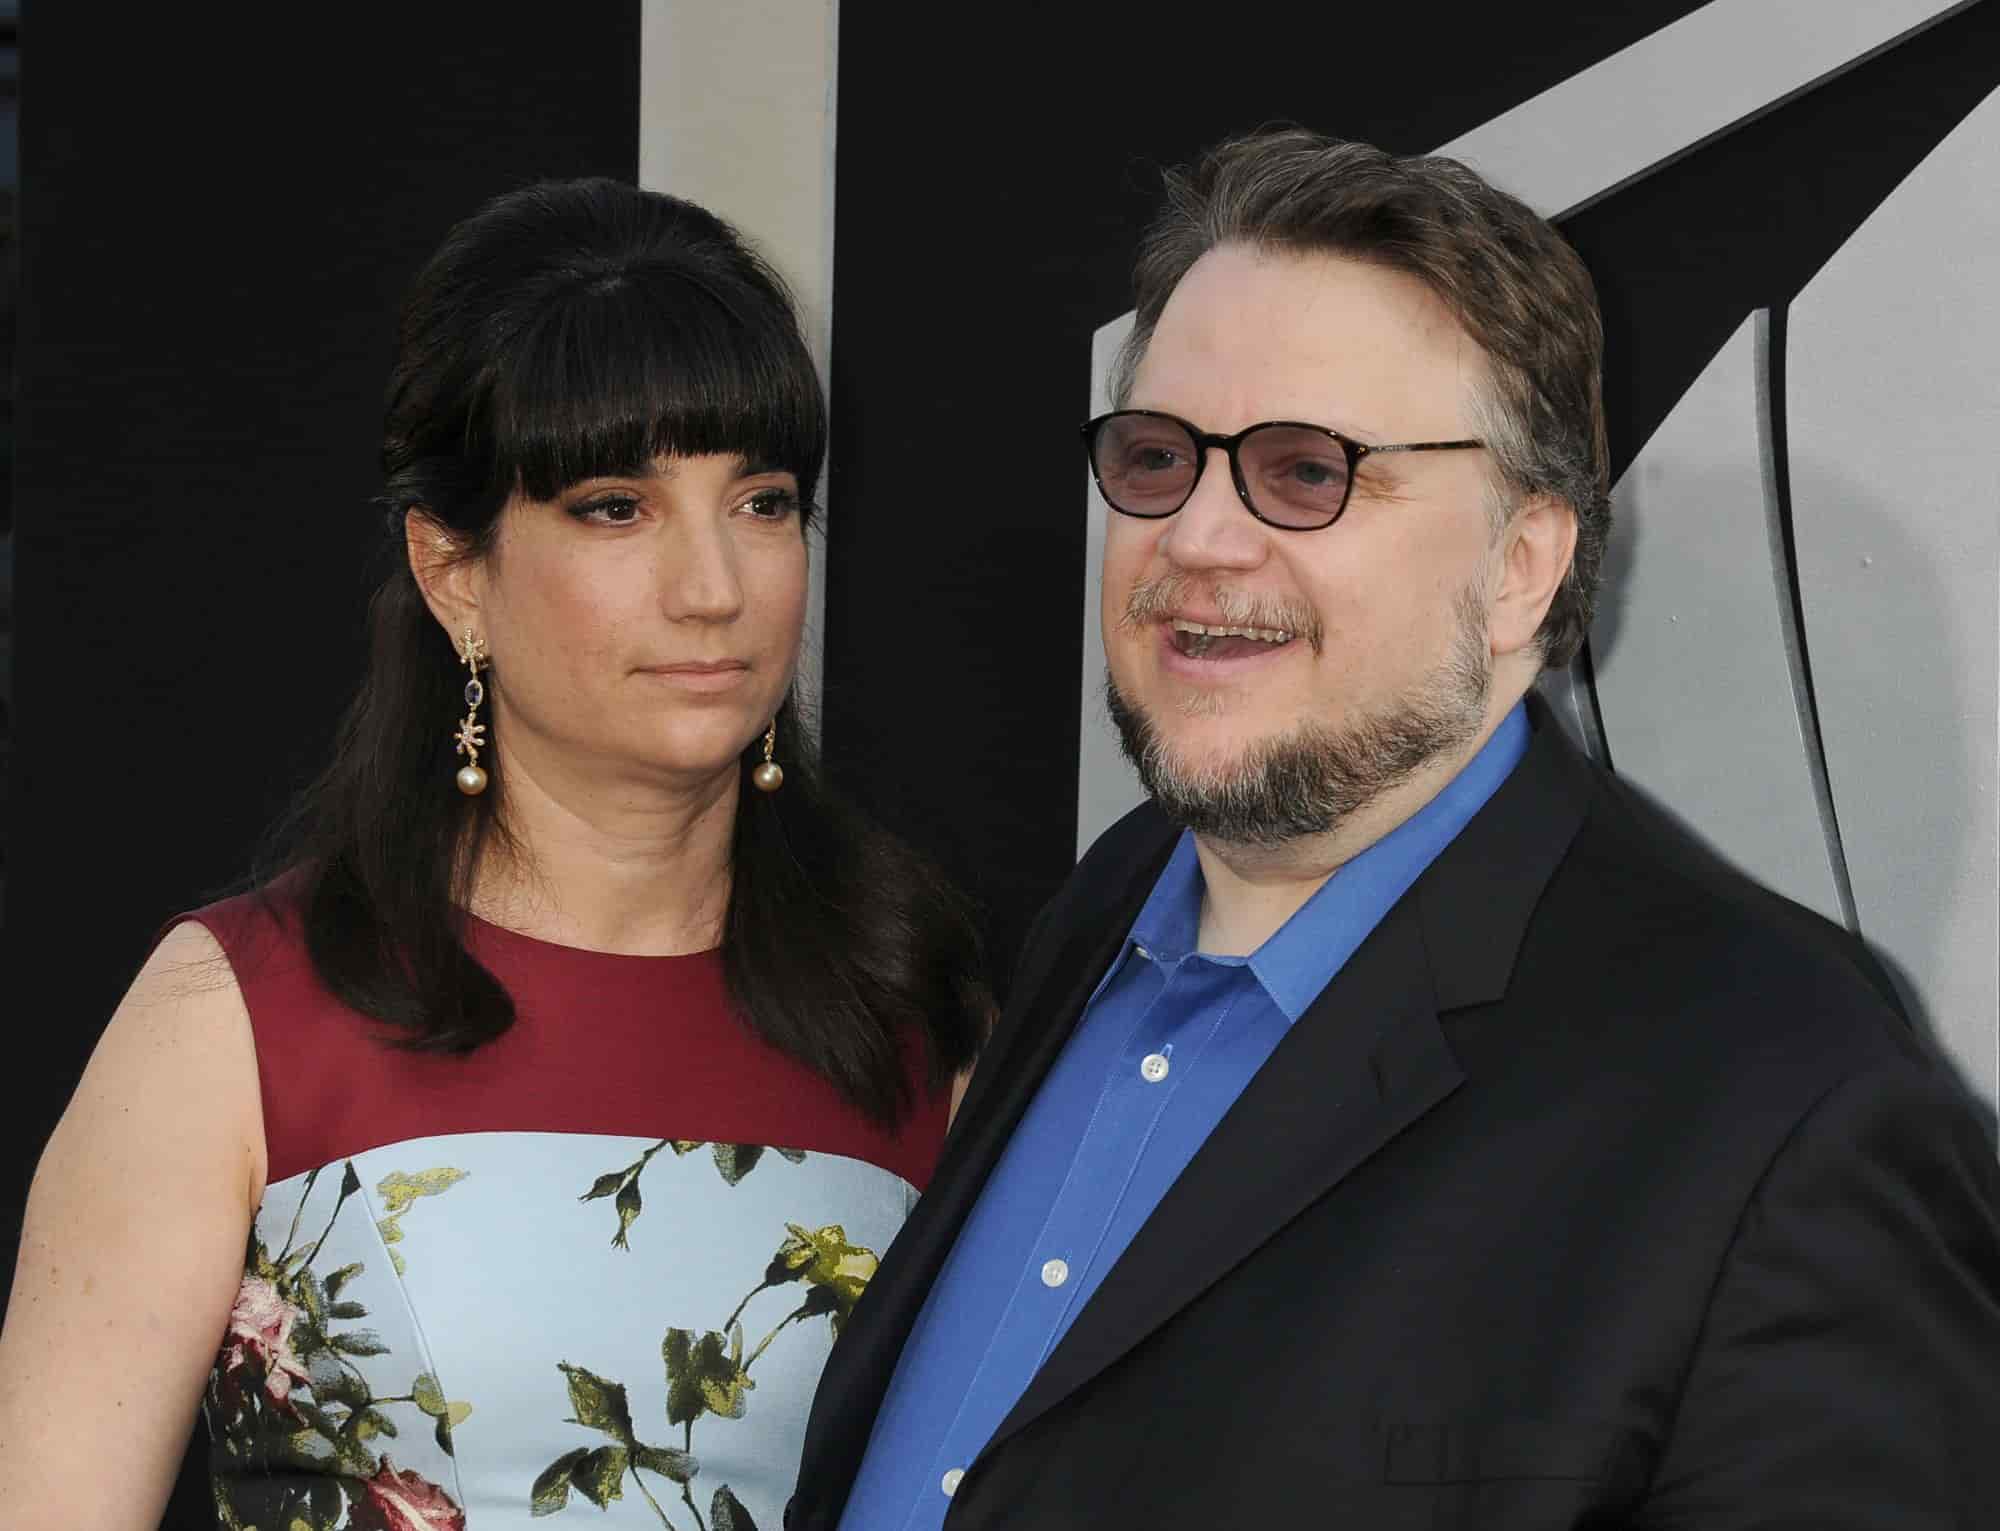 Image of Guillermo del Toro with his former partner, Lorenza Newton